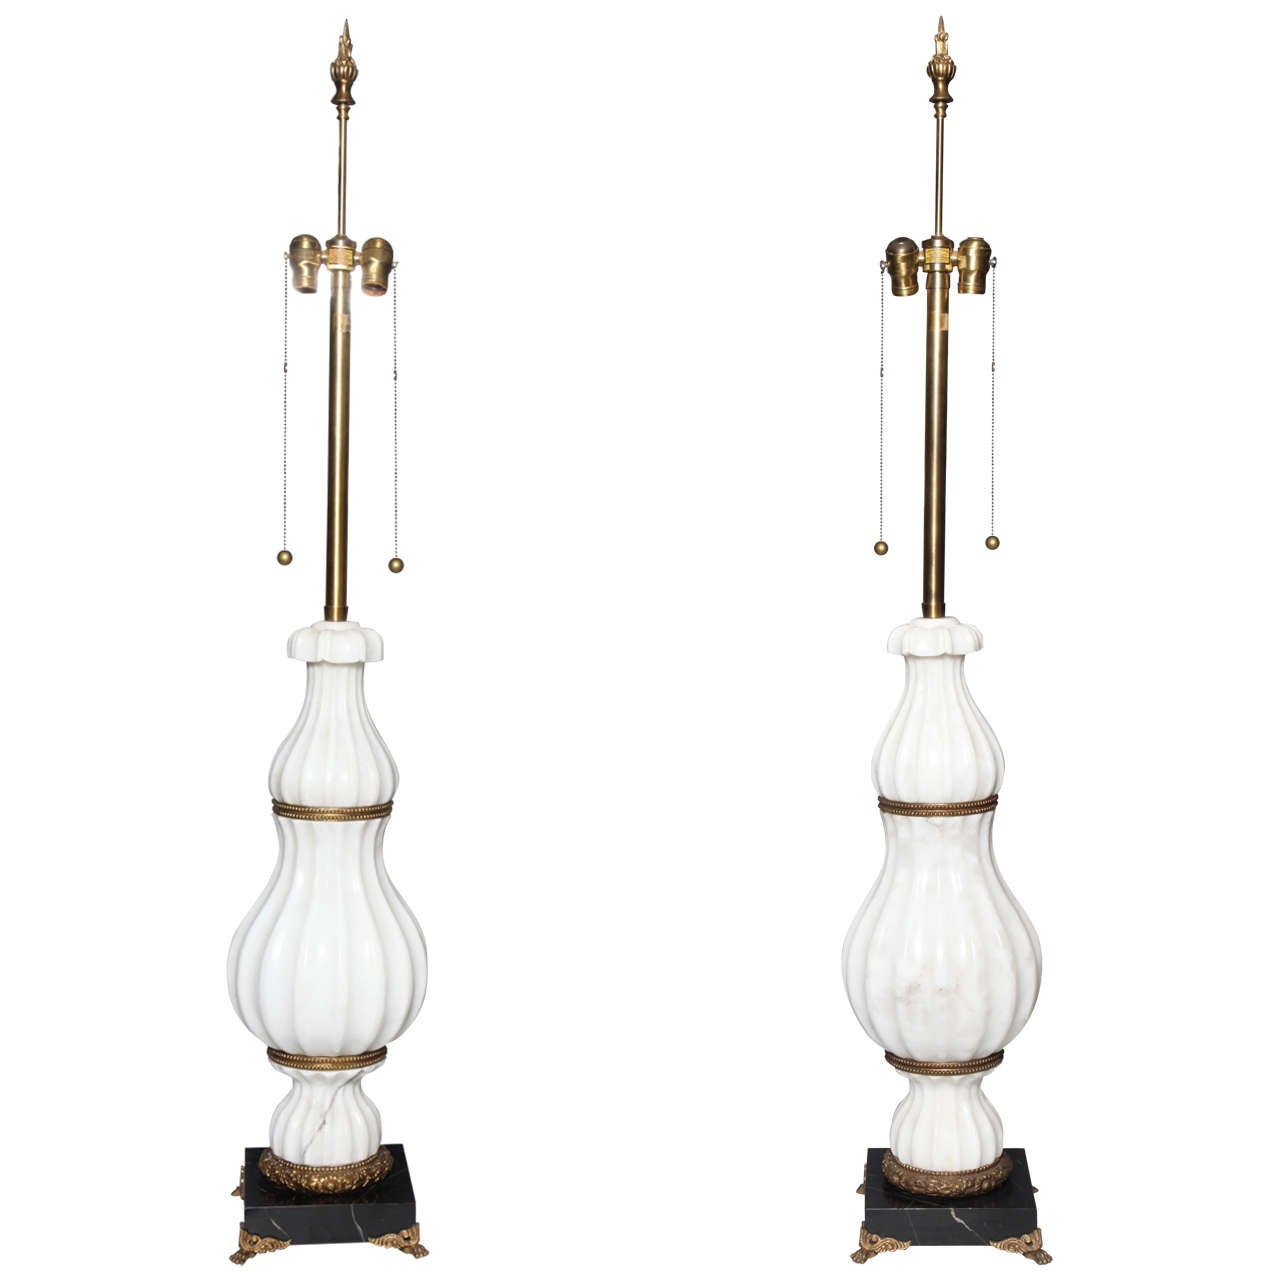 Pair of White Marble and Bronze Art Deco Lamps Attributed to E. F. Caldwell For Sale